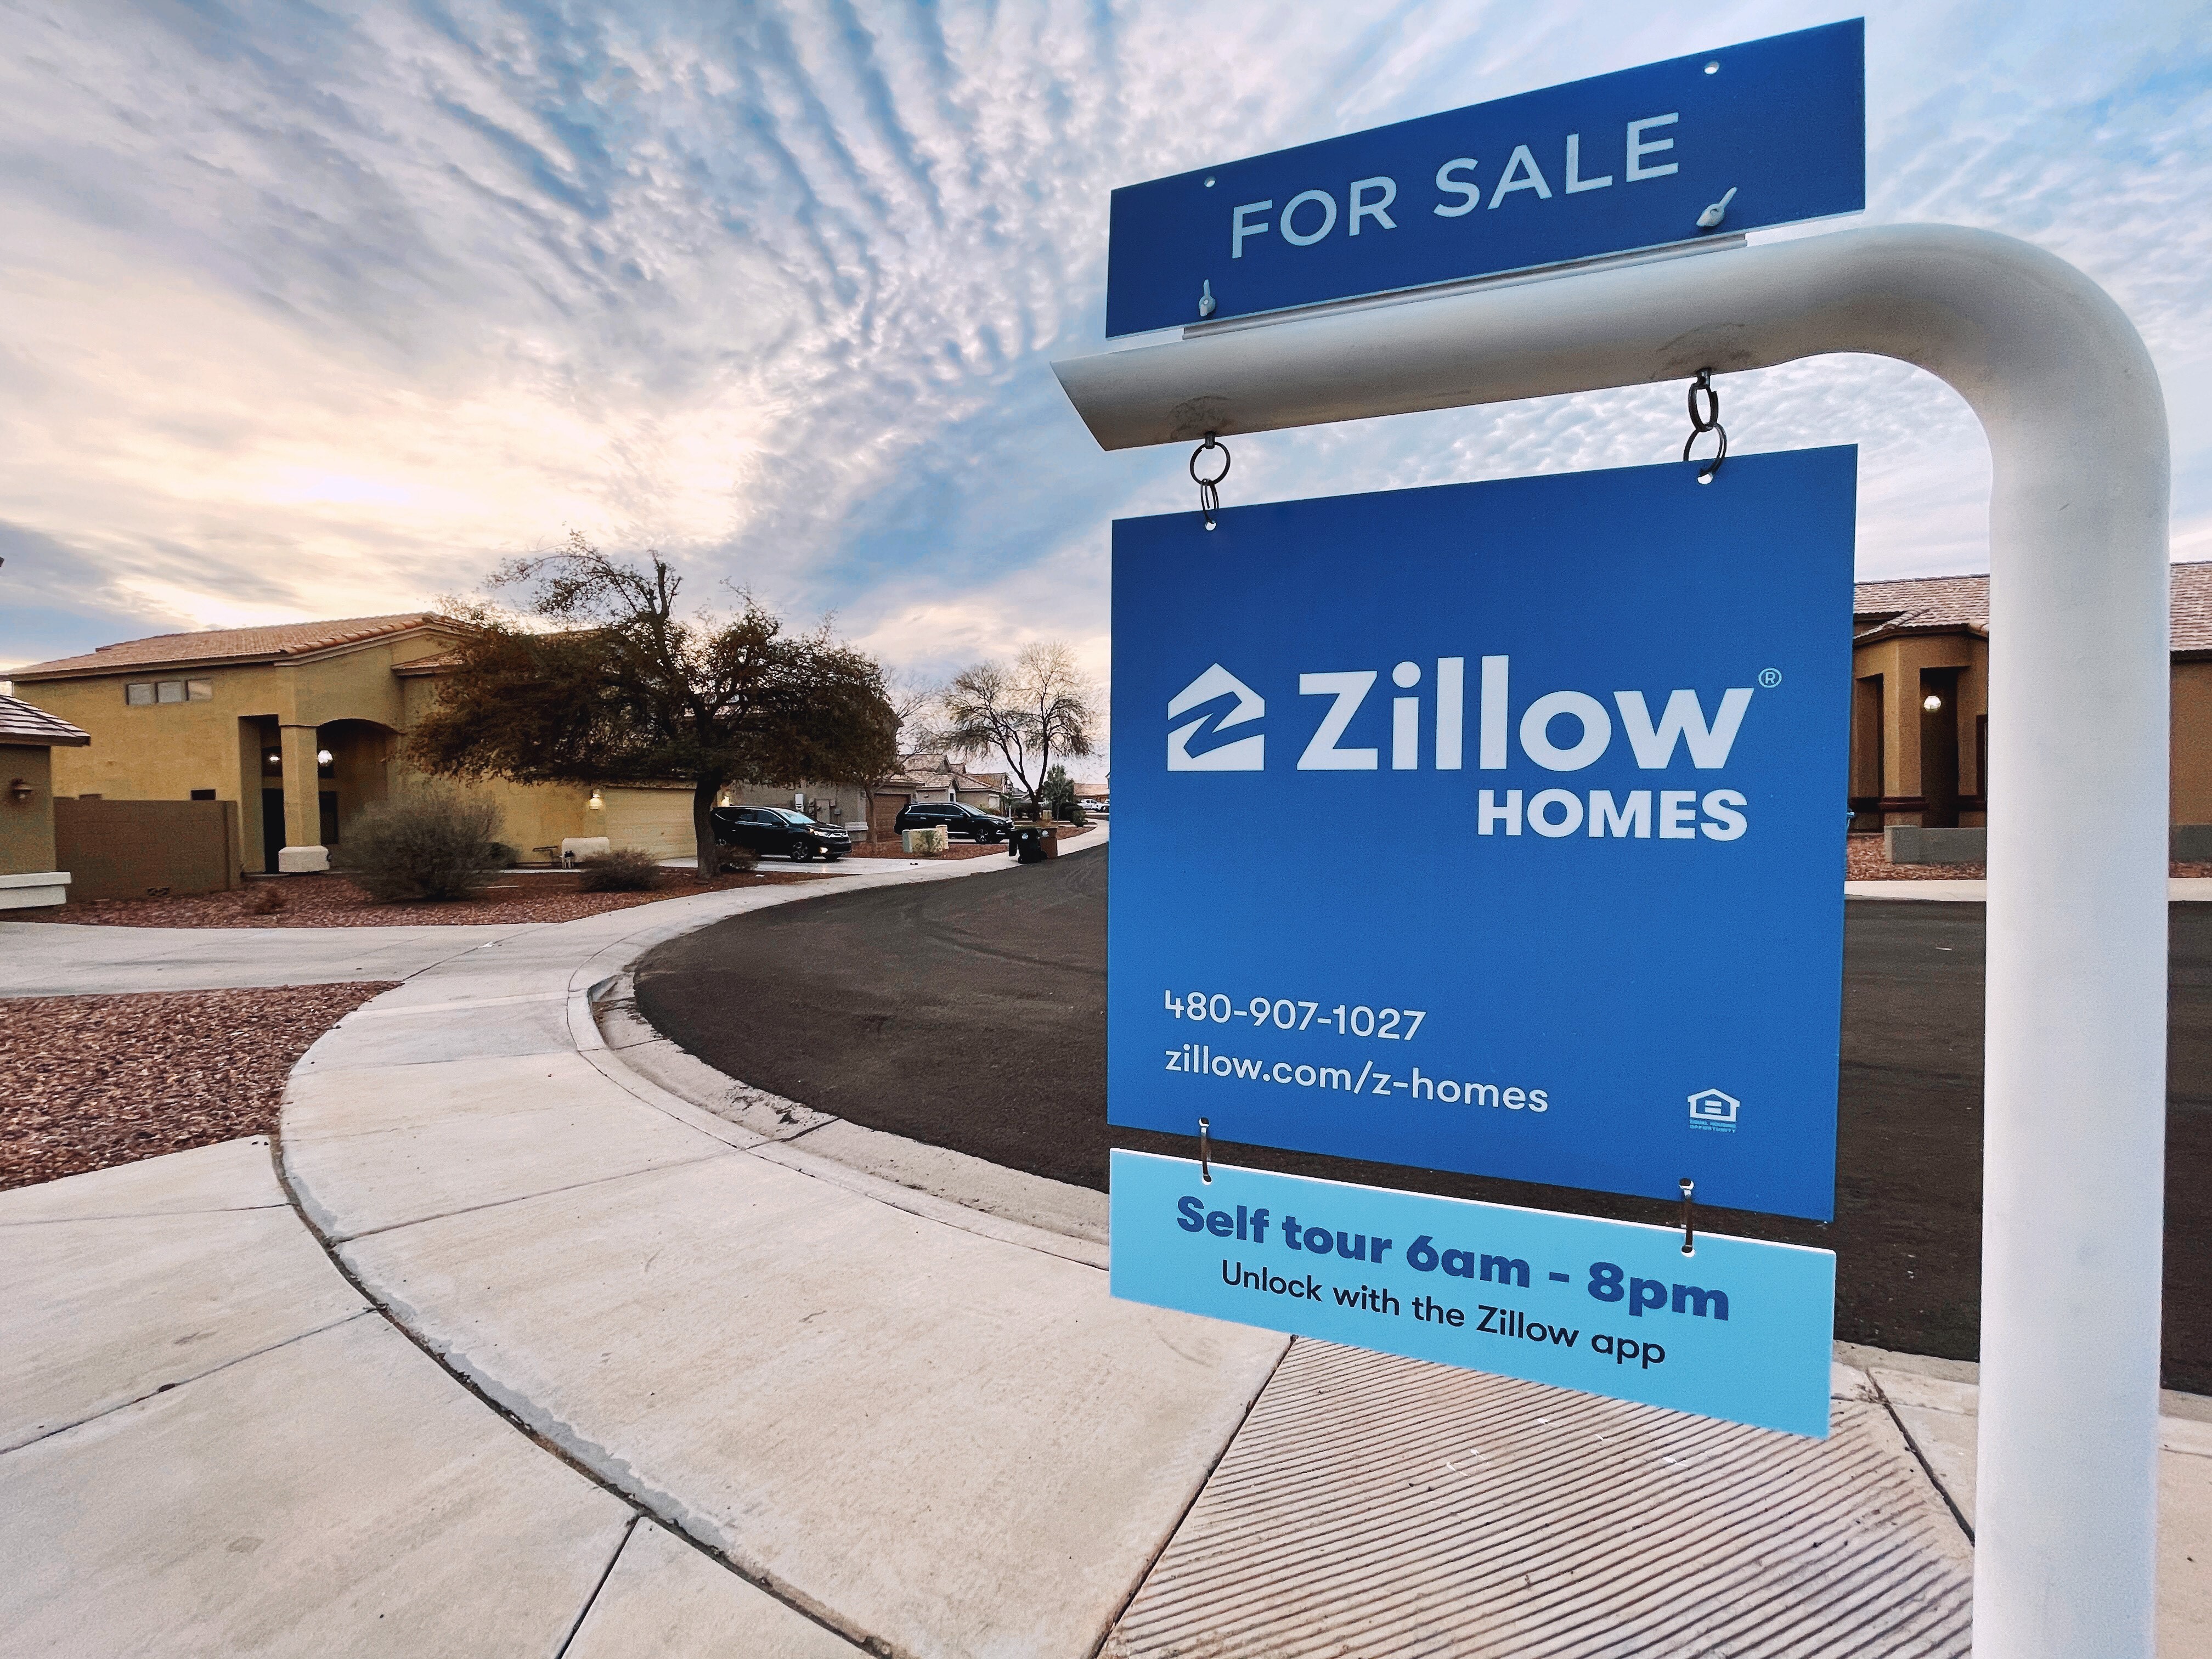 Zillow Launched a Brokerage, But Agents Say Buyers and Sellers Should  Beware - CandysDirt.com